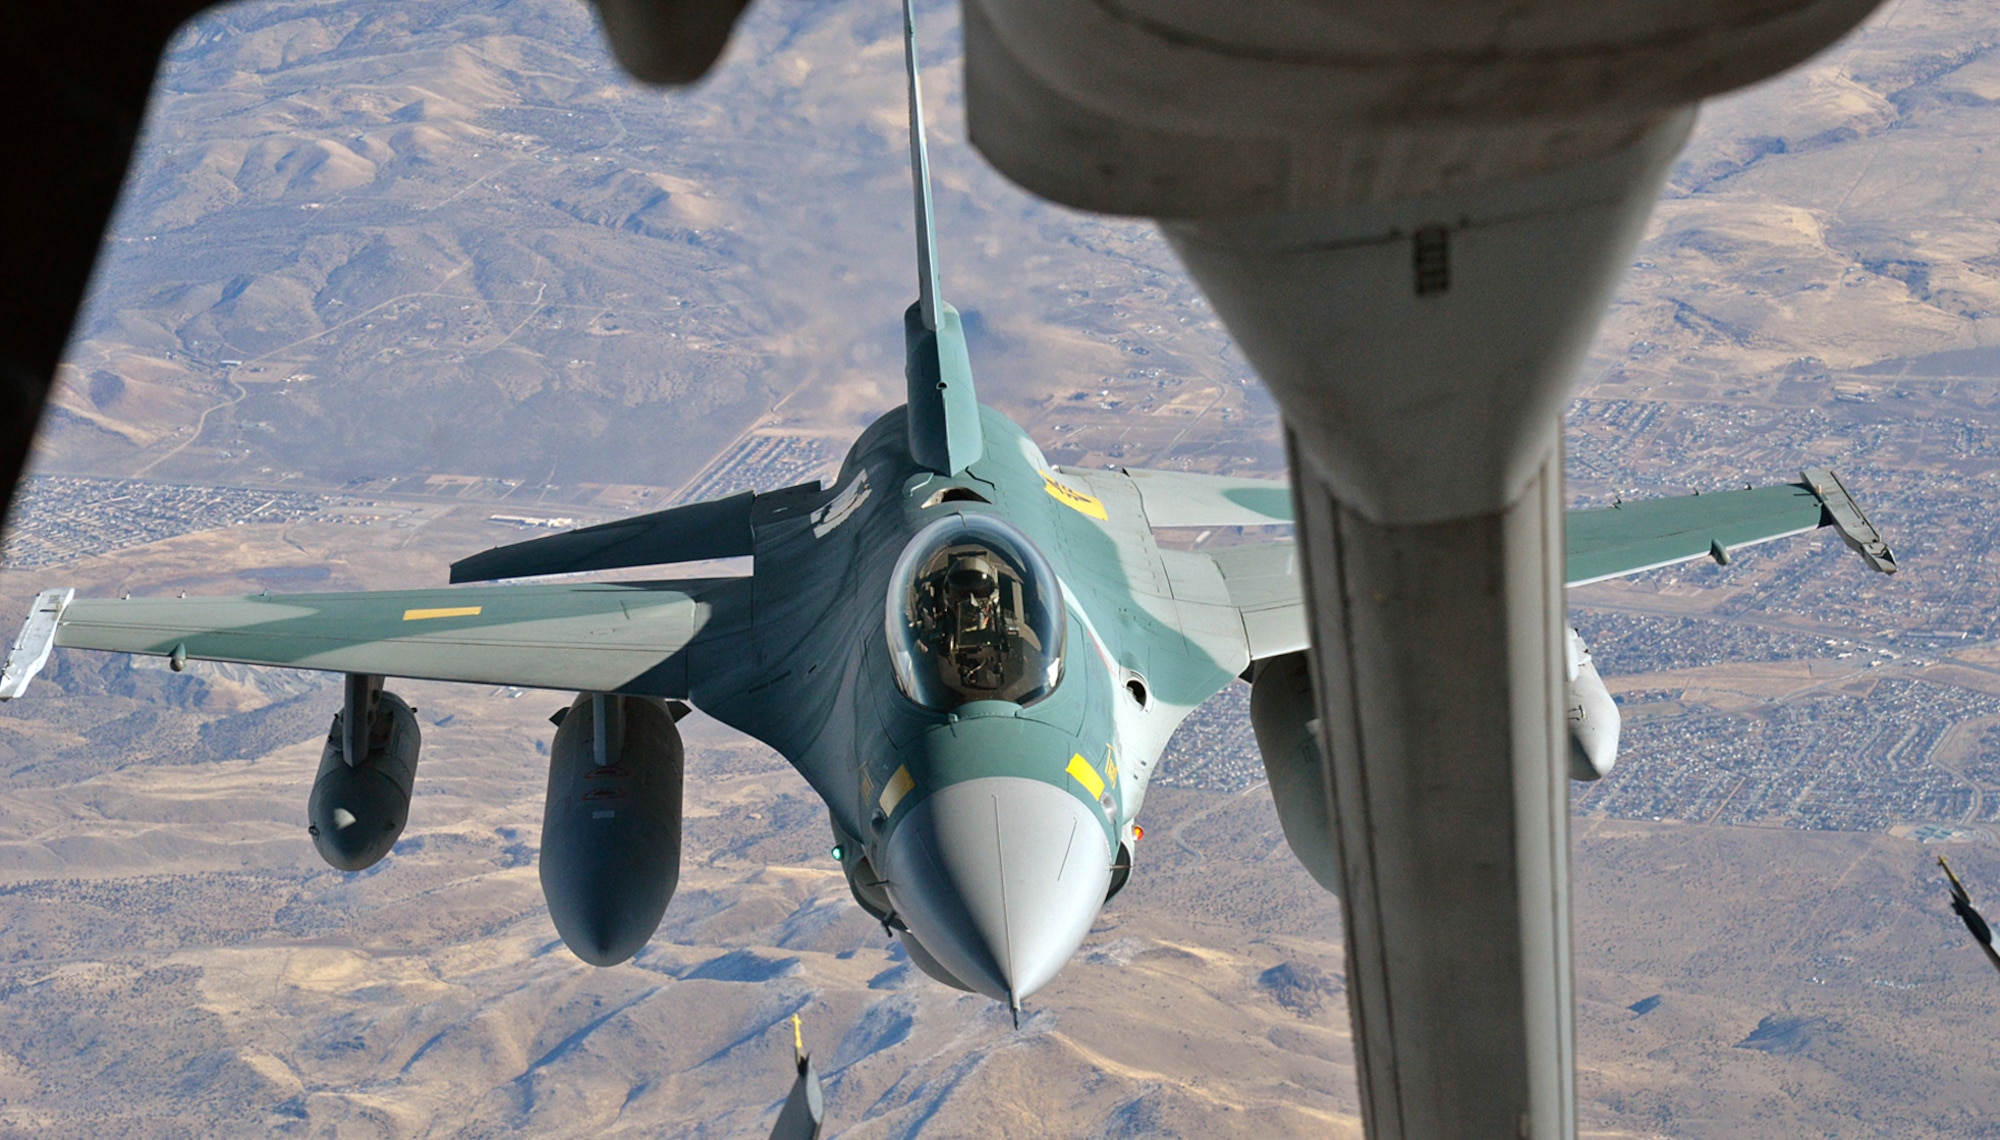 Over Sun Valley, Nevada, Arizona National Guard pilot, Lt. Col. Gregory “Ajax” Gaff, positions his Indonesian F-16C behind a KC-10 Extender aerial refueling aircraft in preparation to receive fuel during a ferry flight from Hill Air Force Base, Utah, to Hickam AFB, Hawaii, on Dec. 6, 2017. The aircraft was fitted with three external tanks and be refueled several times during the six-and-a-half hour flight. (U.S. Air Force photo by Alex R. Lloyd)